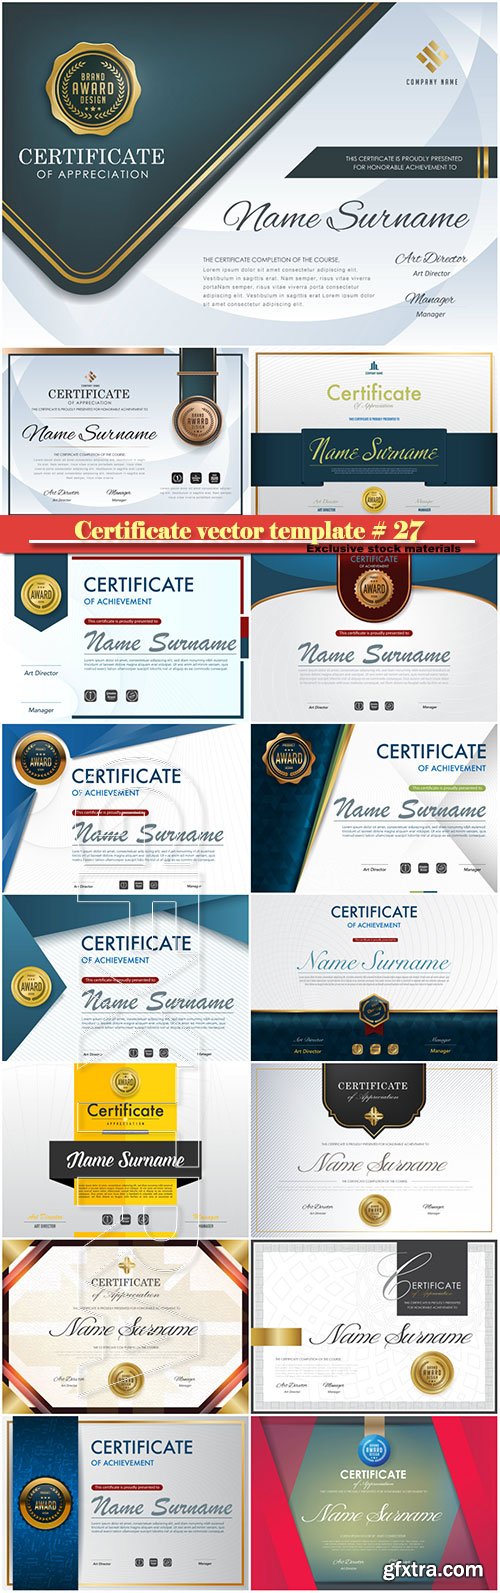 Certificate and vector diploma design template # 27